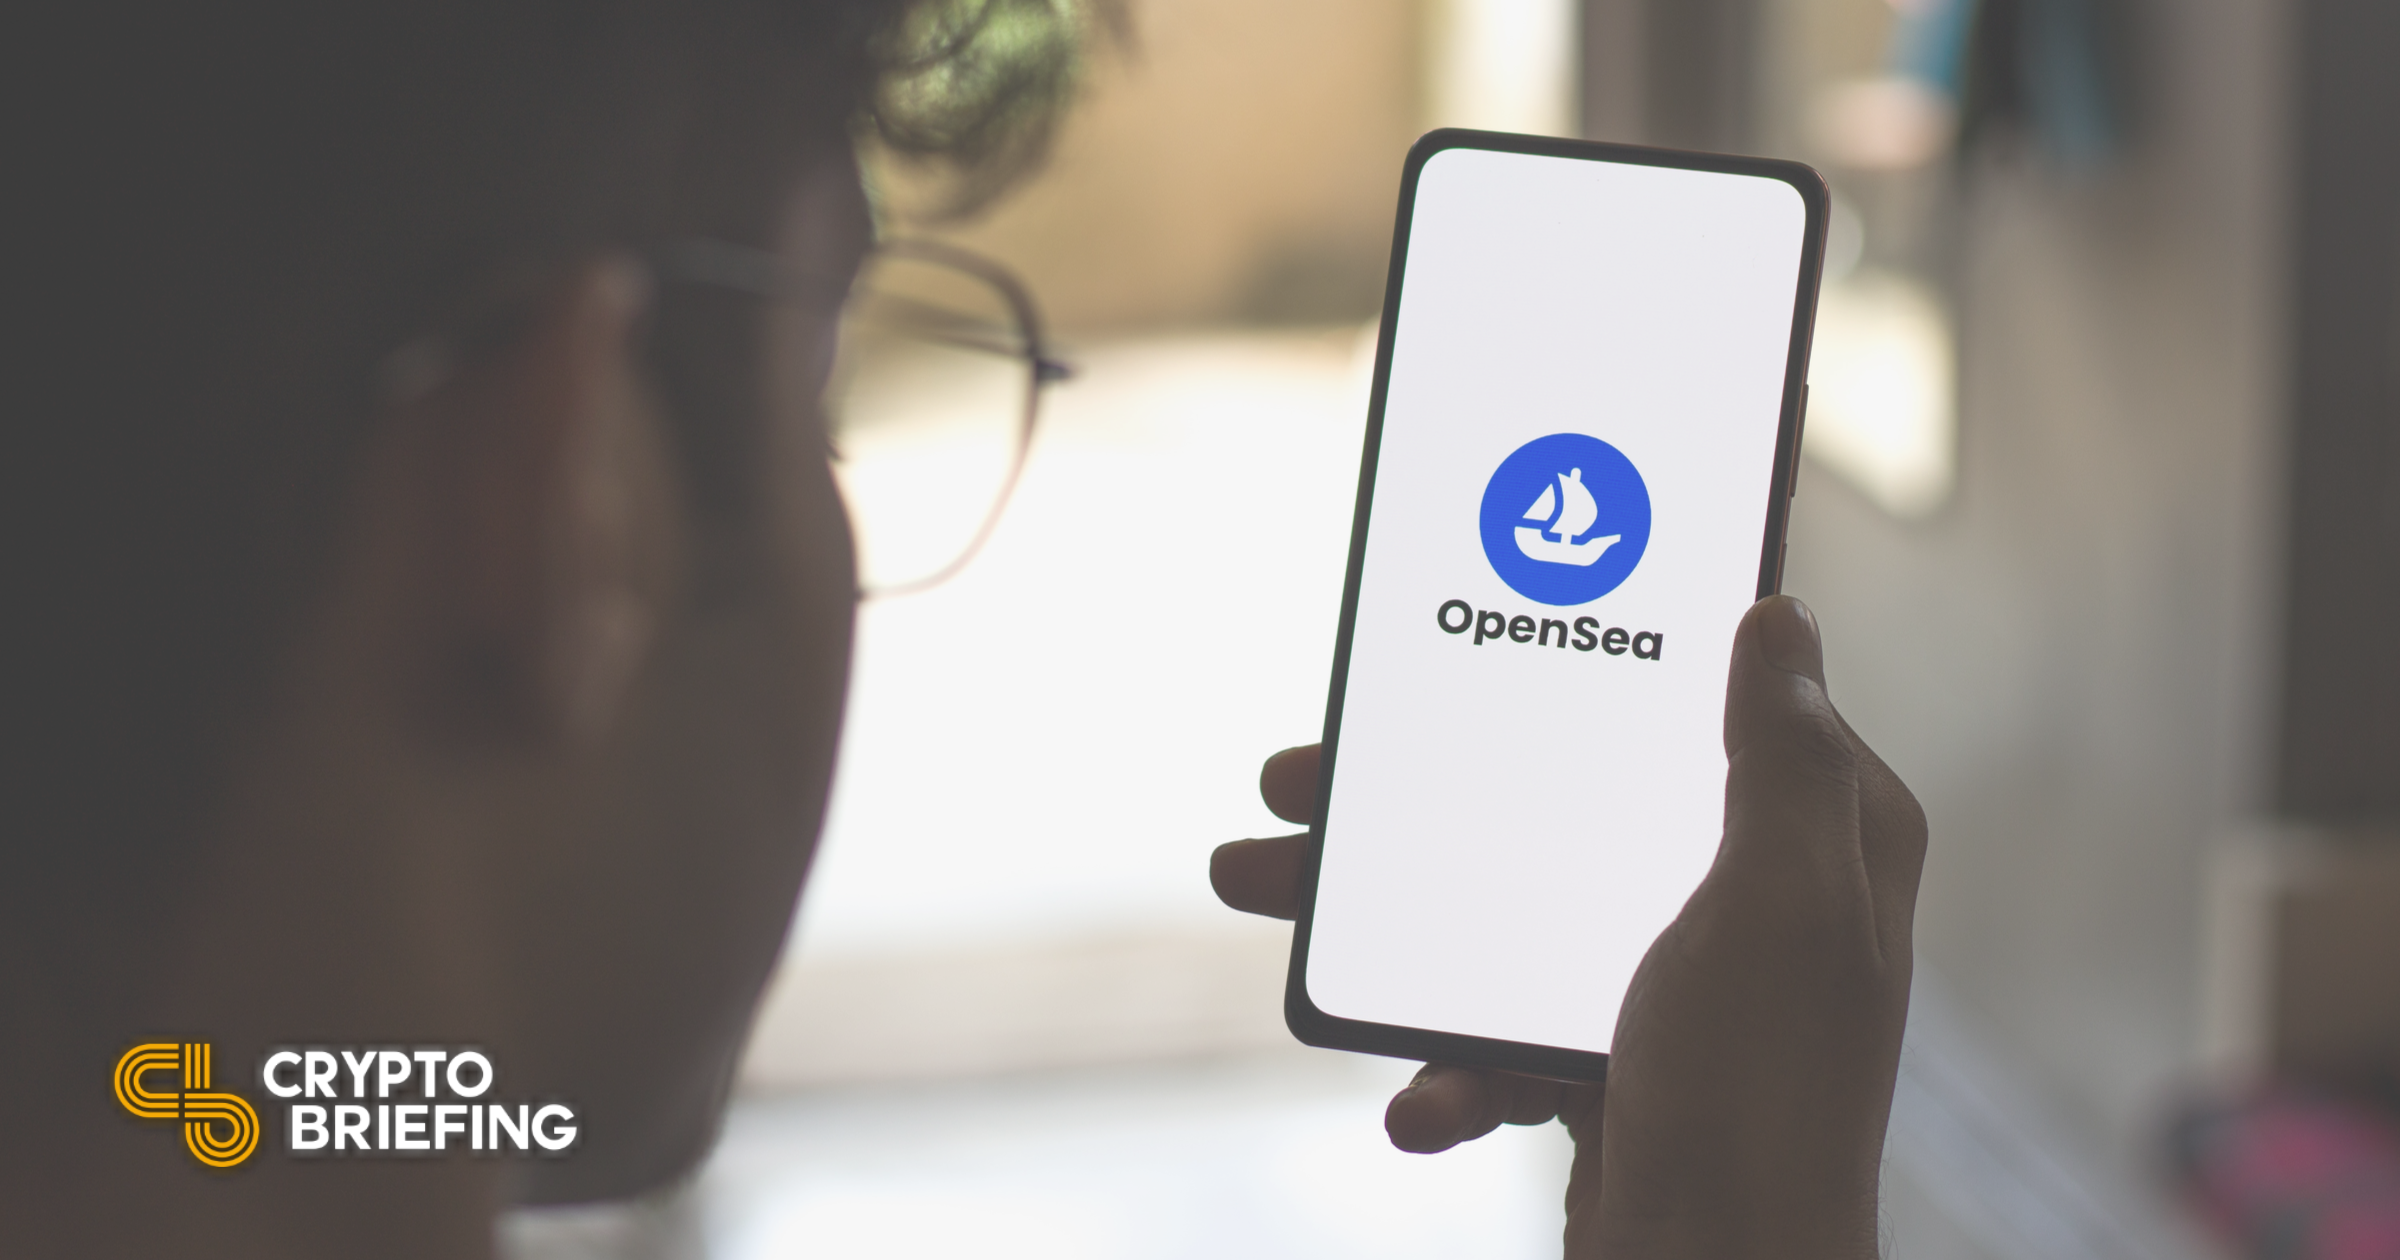 OpenSea Backtracks on IPO Plans Following Community Backlash - Crypto  Briefing